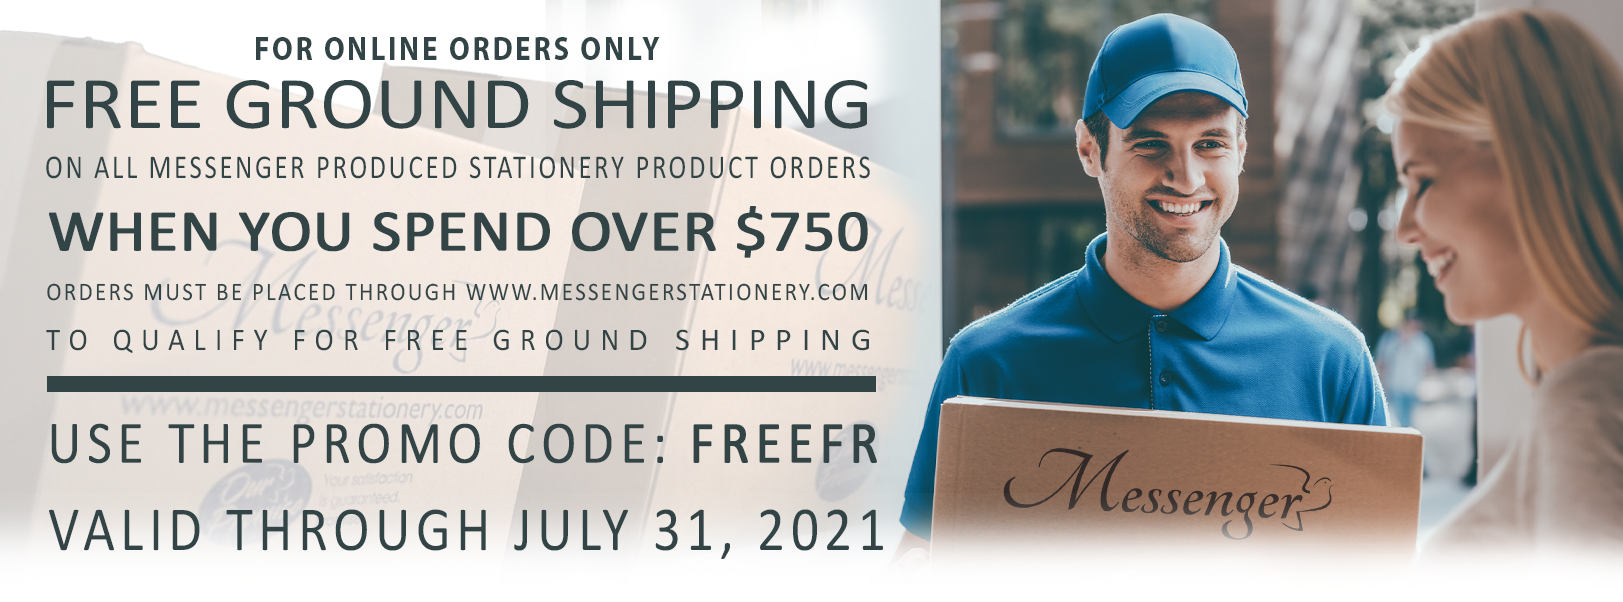 Free Ground Shipping with FREEFR